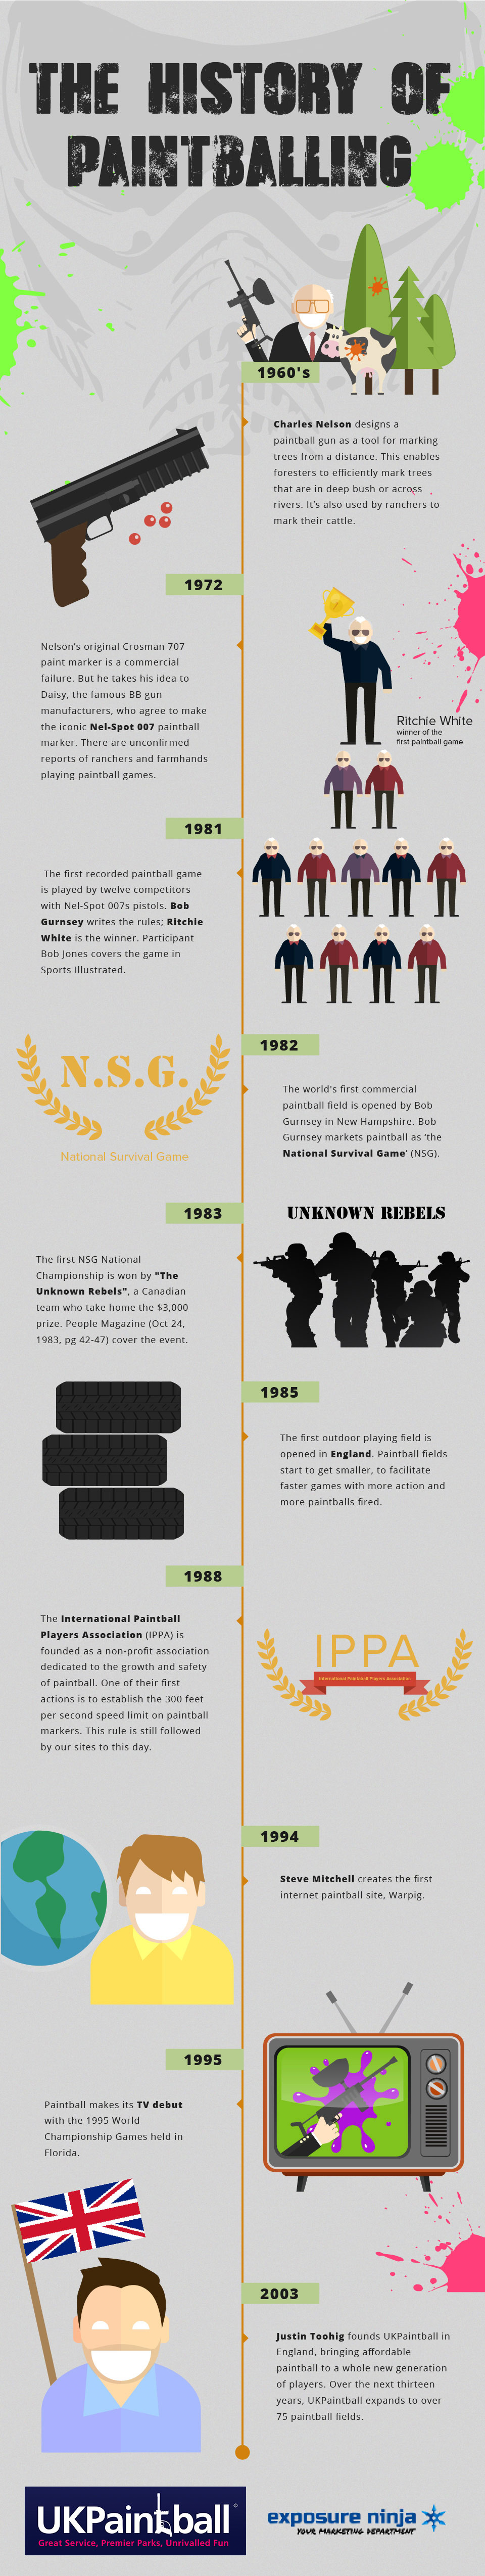 Paintballing-History-Infographic